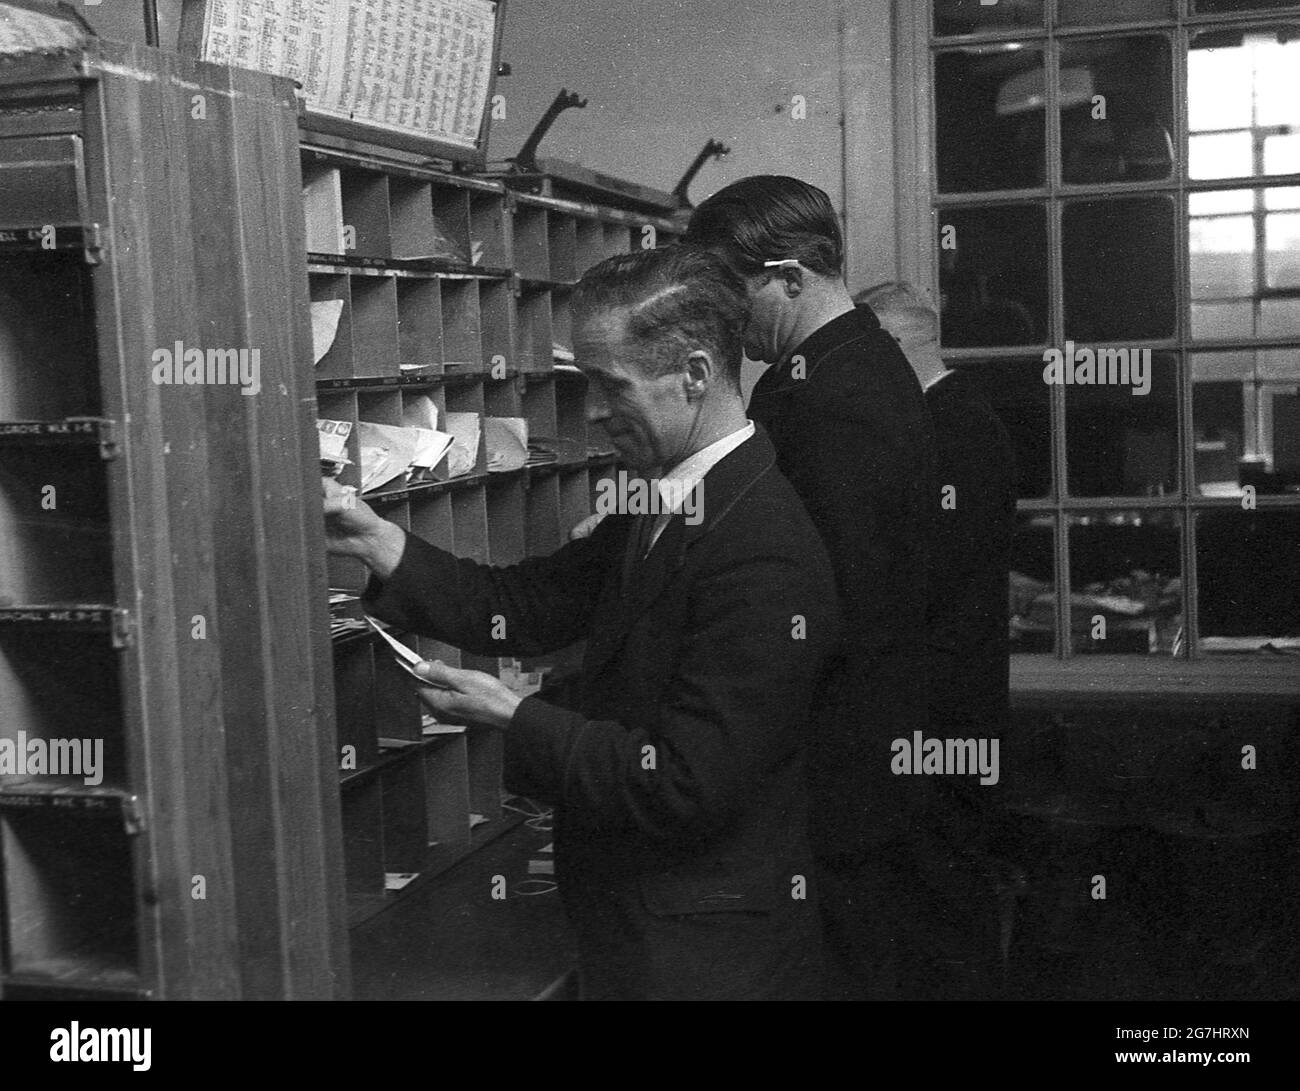 1950s, historical, three male GPO workers sorting out letters or mail into the cubby or pigeon-holes on a shelf divided up into the district dfferent streets, London, England, UK. Stock Photo